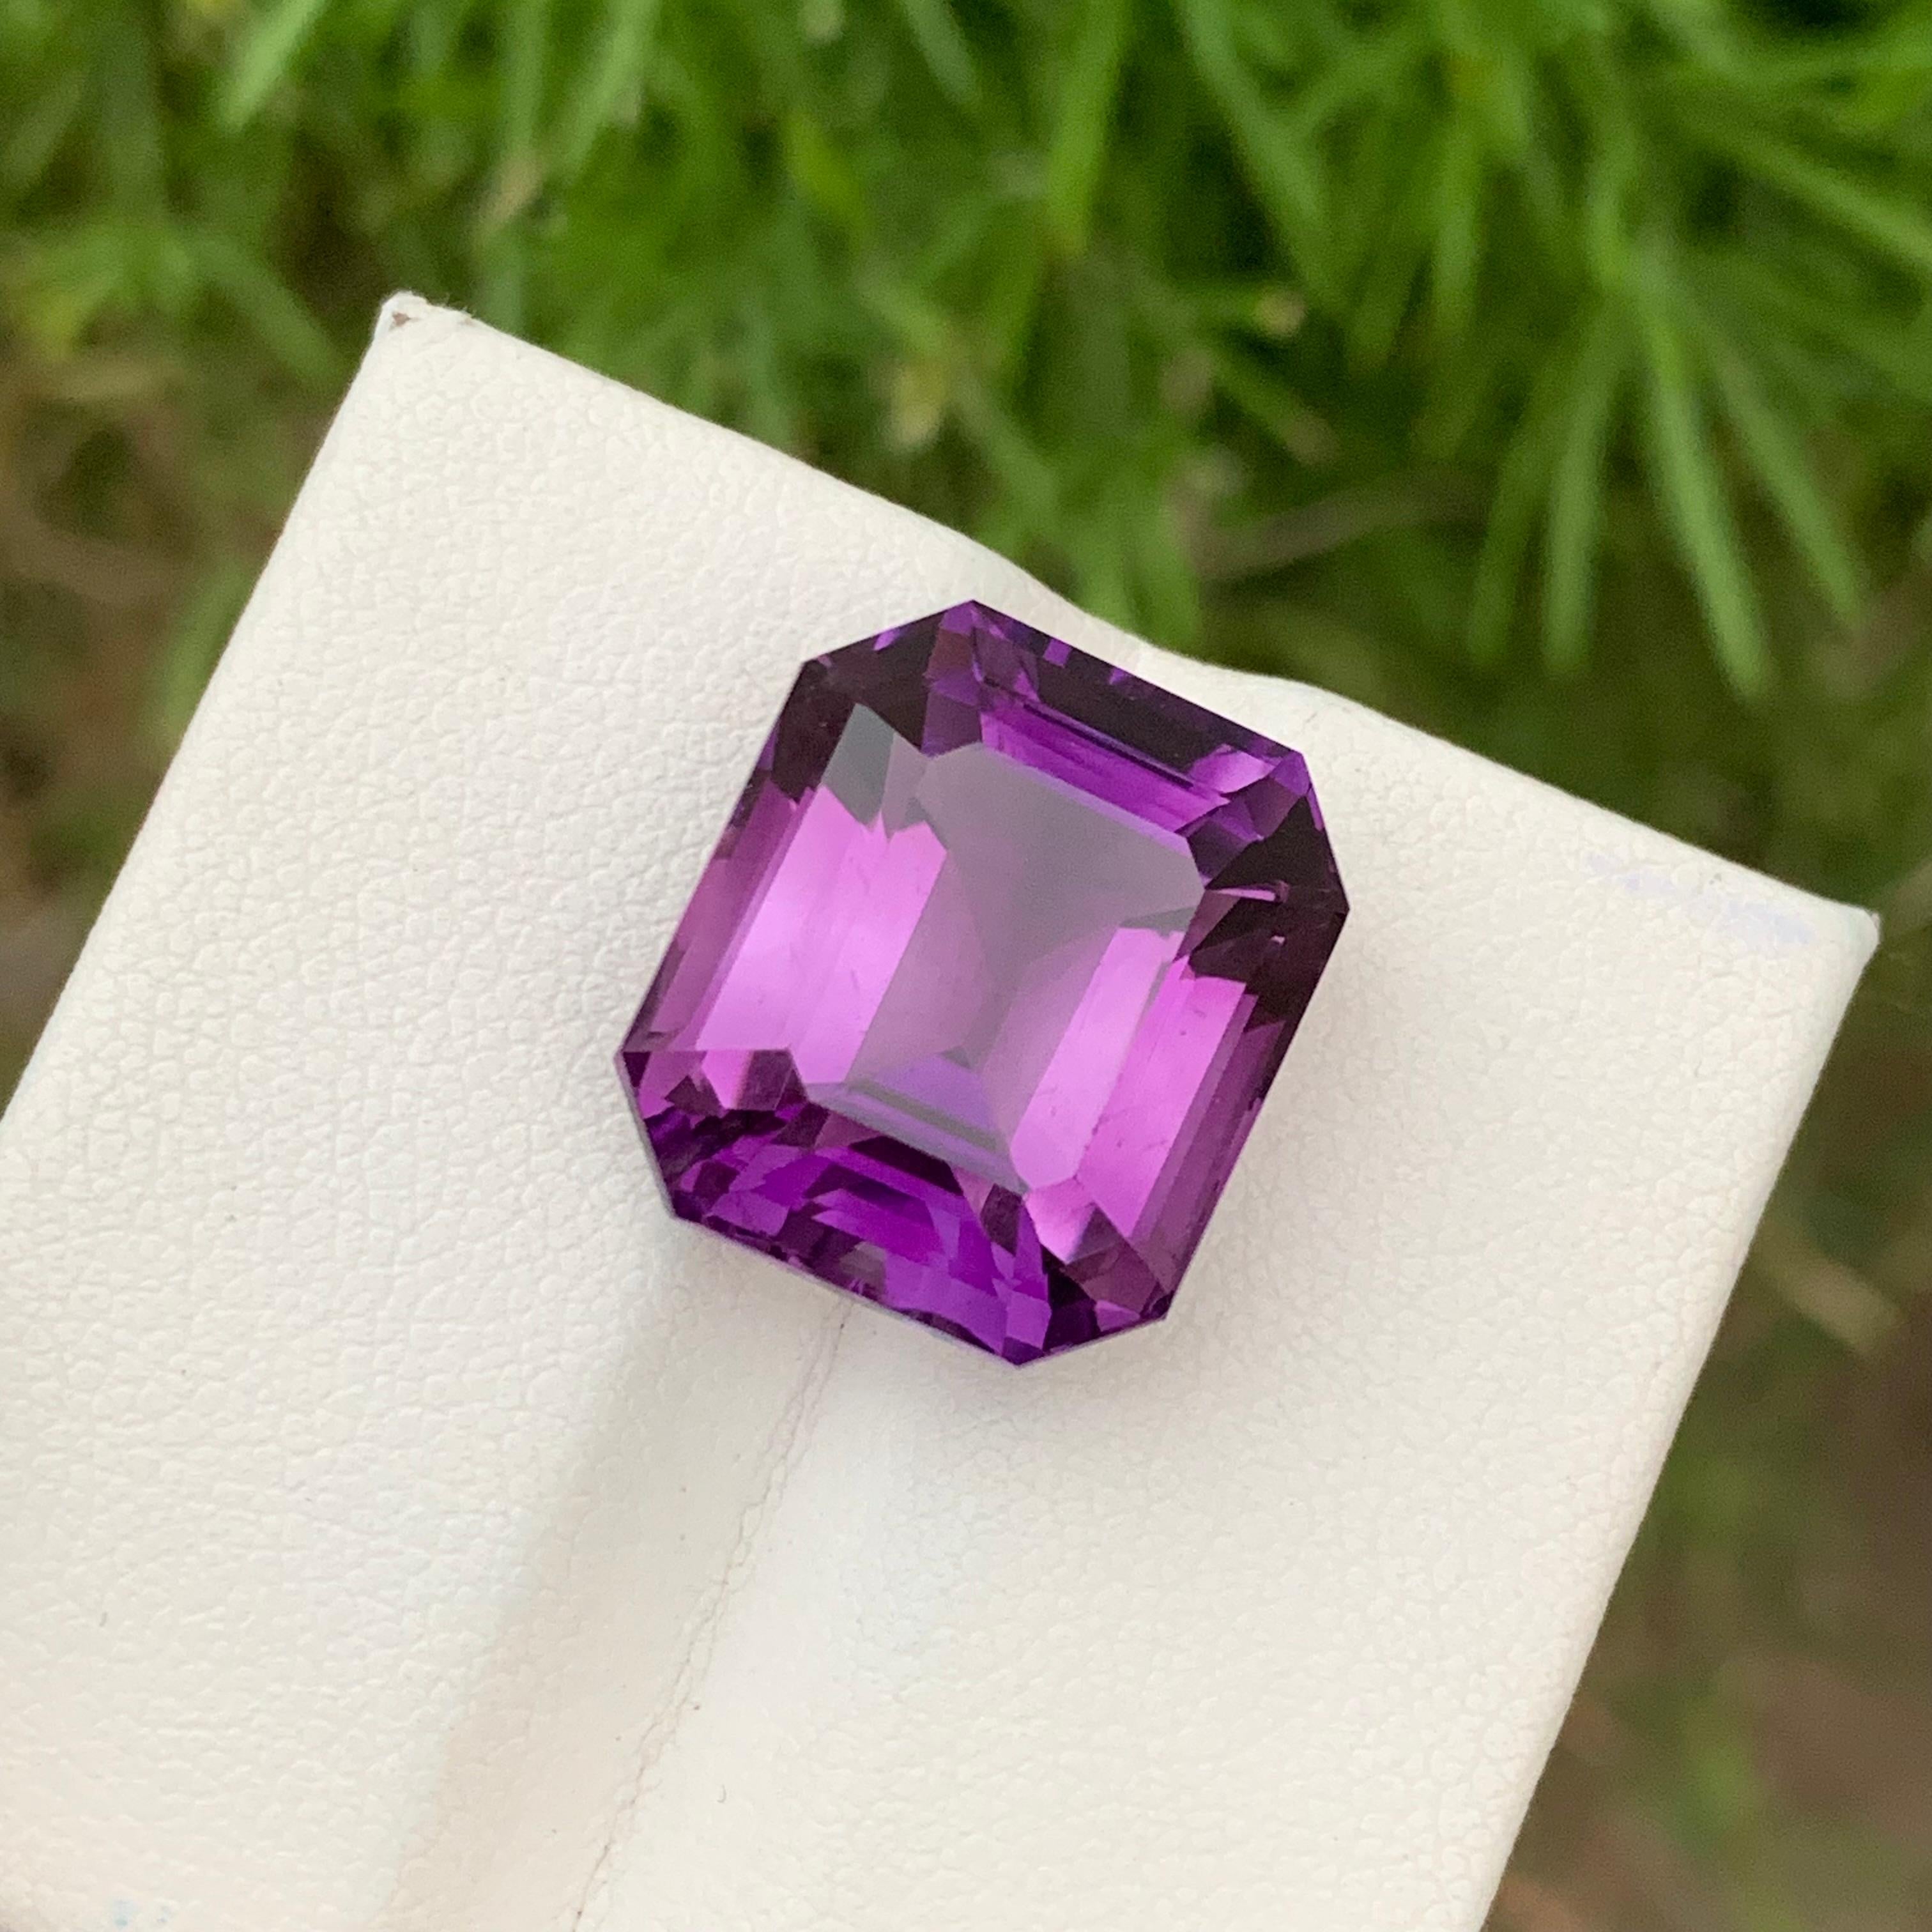 19.0 Carats Natural Loose Deep Purple Amethyst Gemstone From Brazil Mine For Sale 1